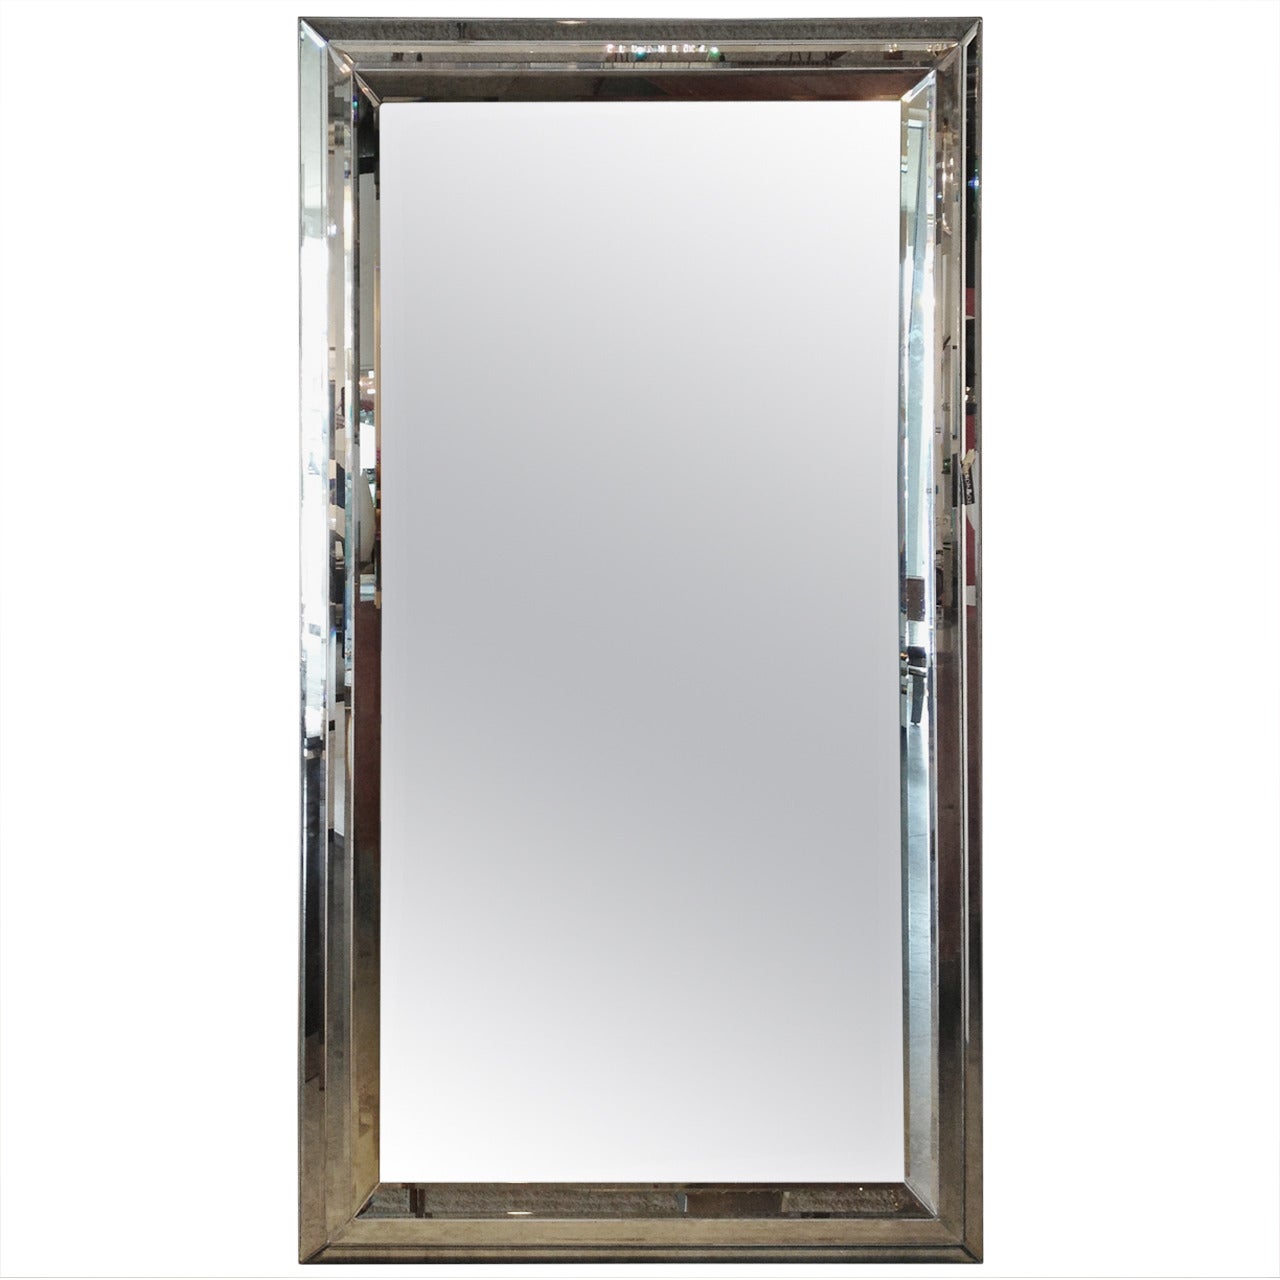 Monumental Modern Mirror with Linear Etched Accents